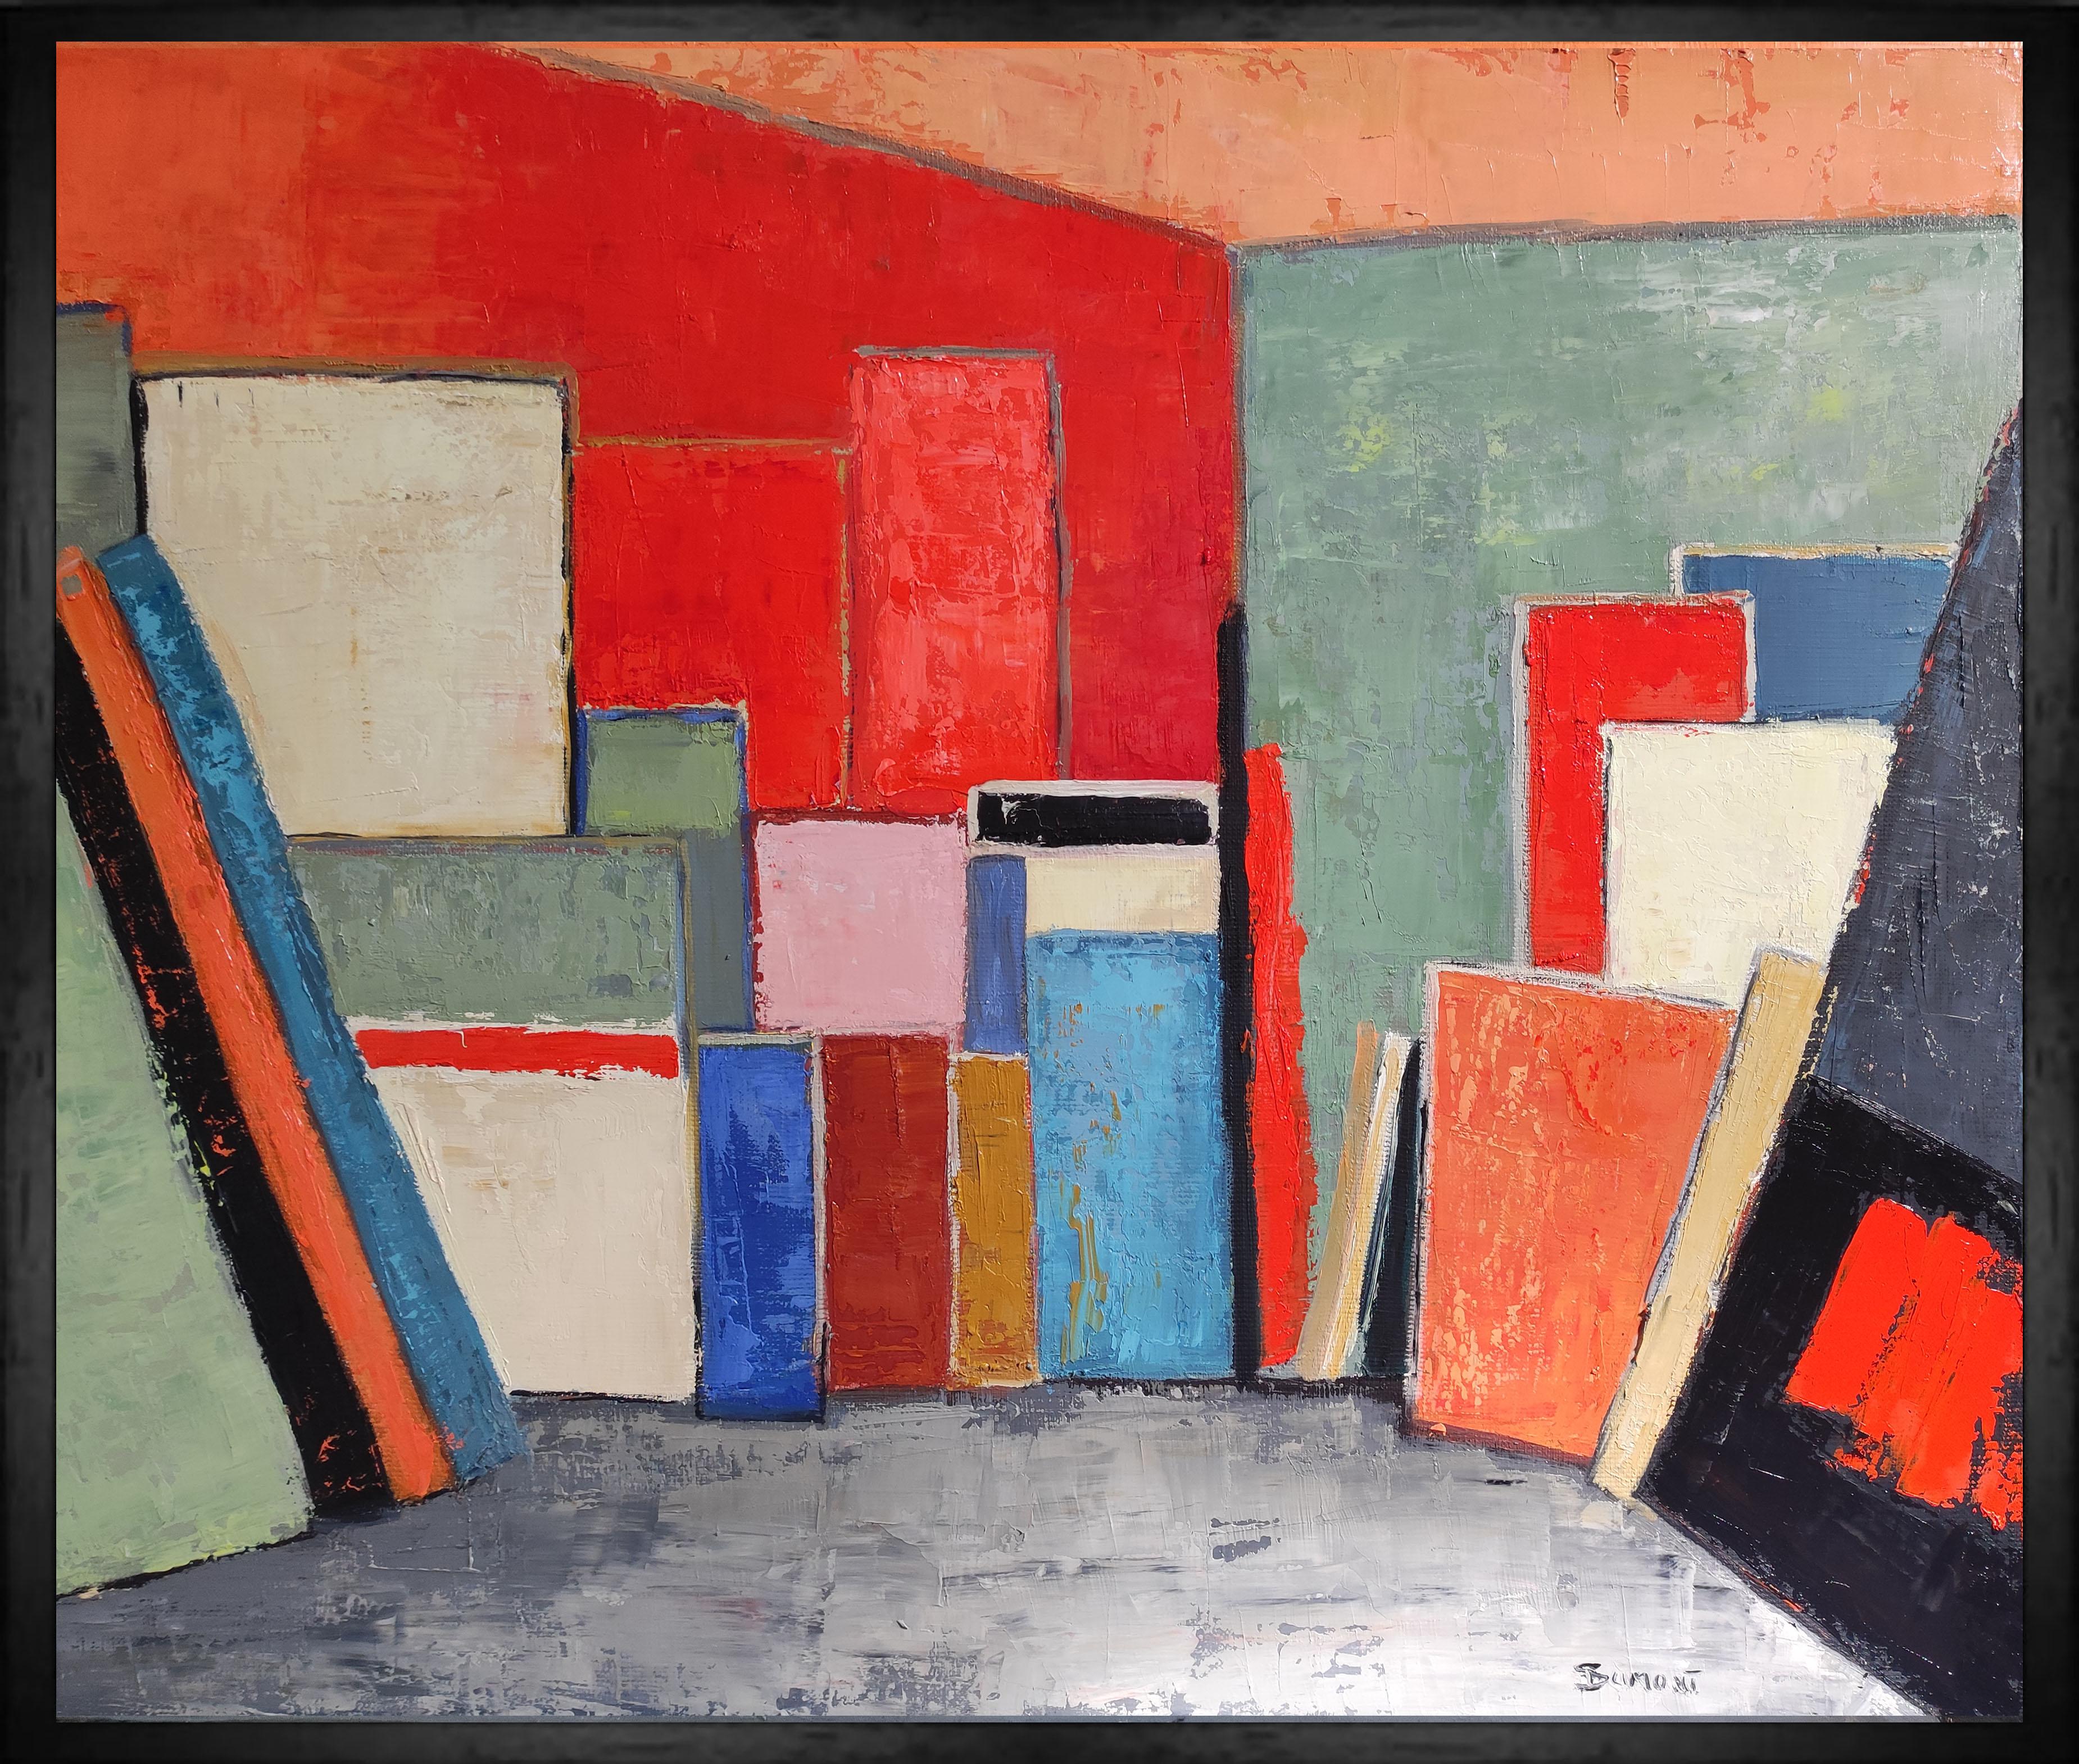 SOPHIE DUMONT Abstract Painting - studio 16, red abstract; geometric, texture, oil on linen canvas